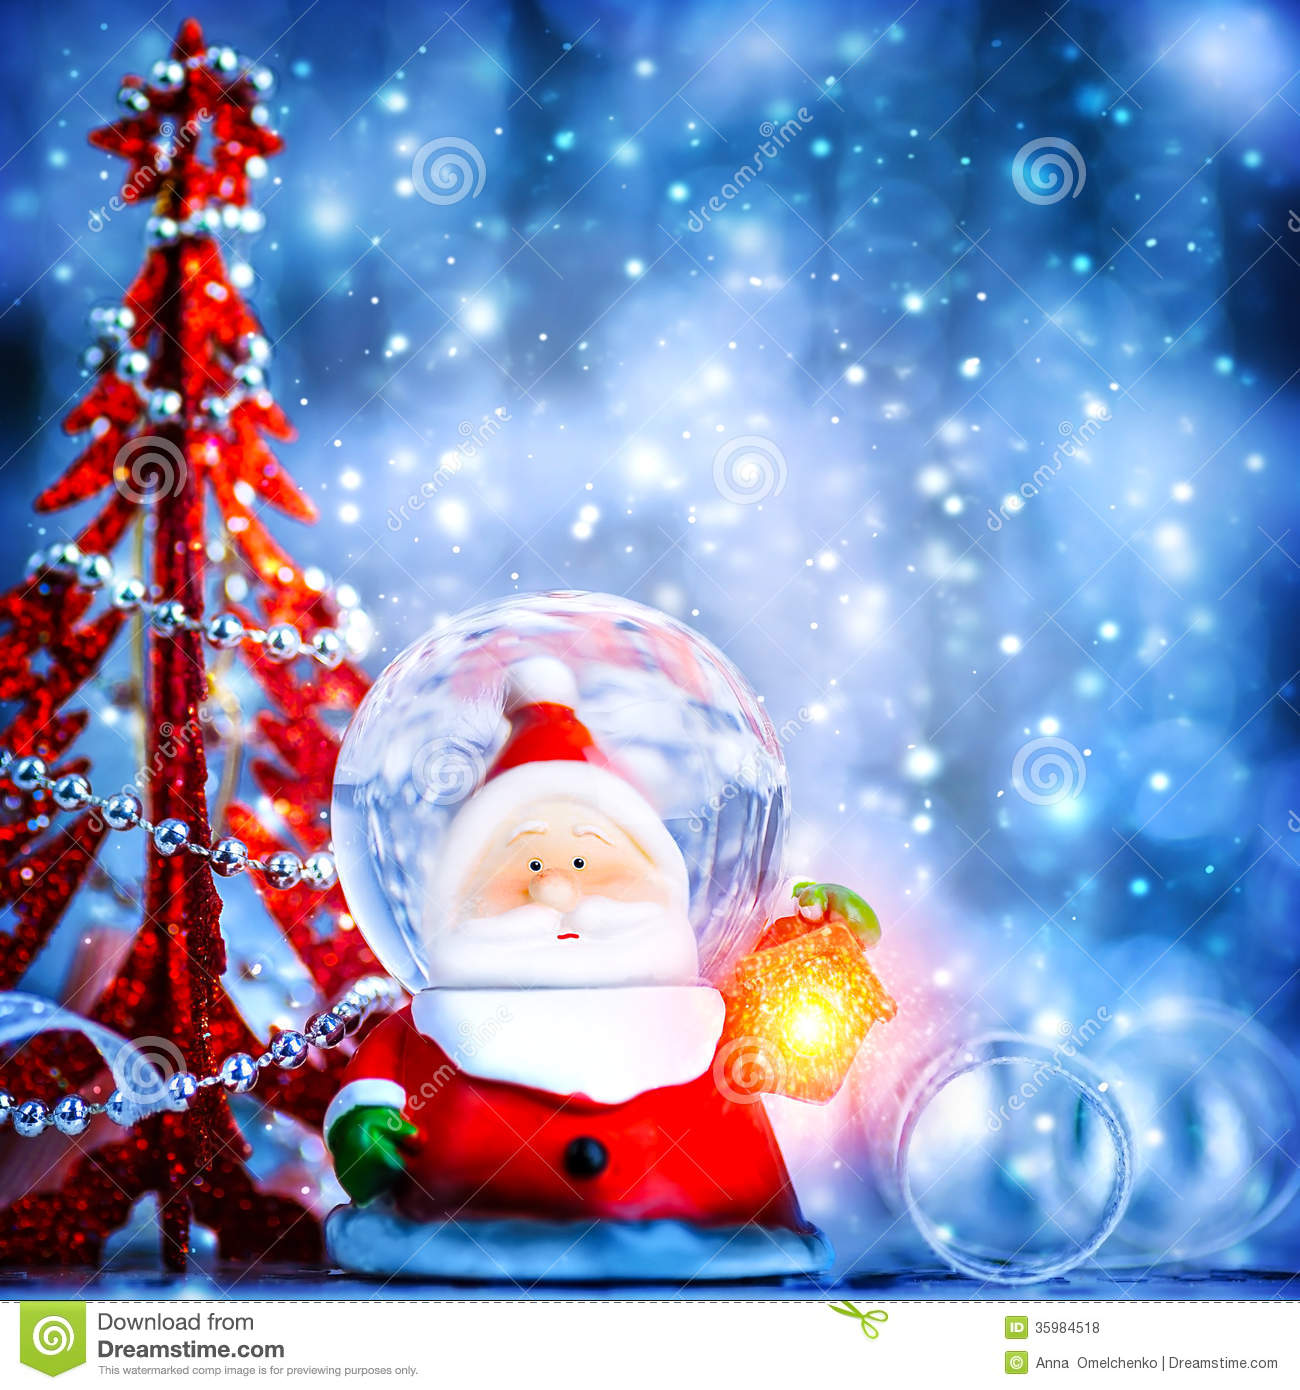 Blue Christmas Background With Cute Snow Globe Santa Claus Border Over    